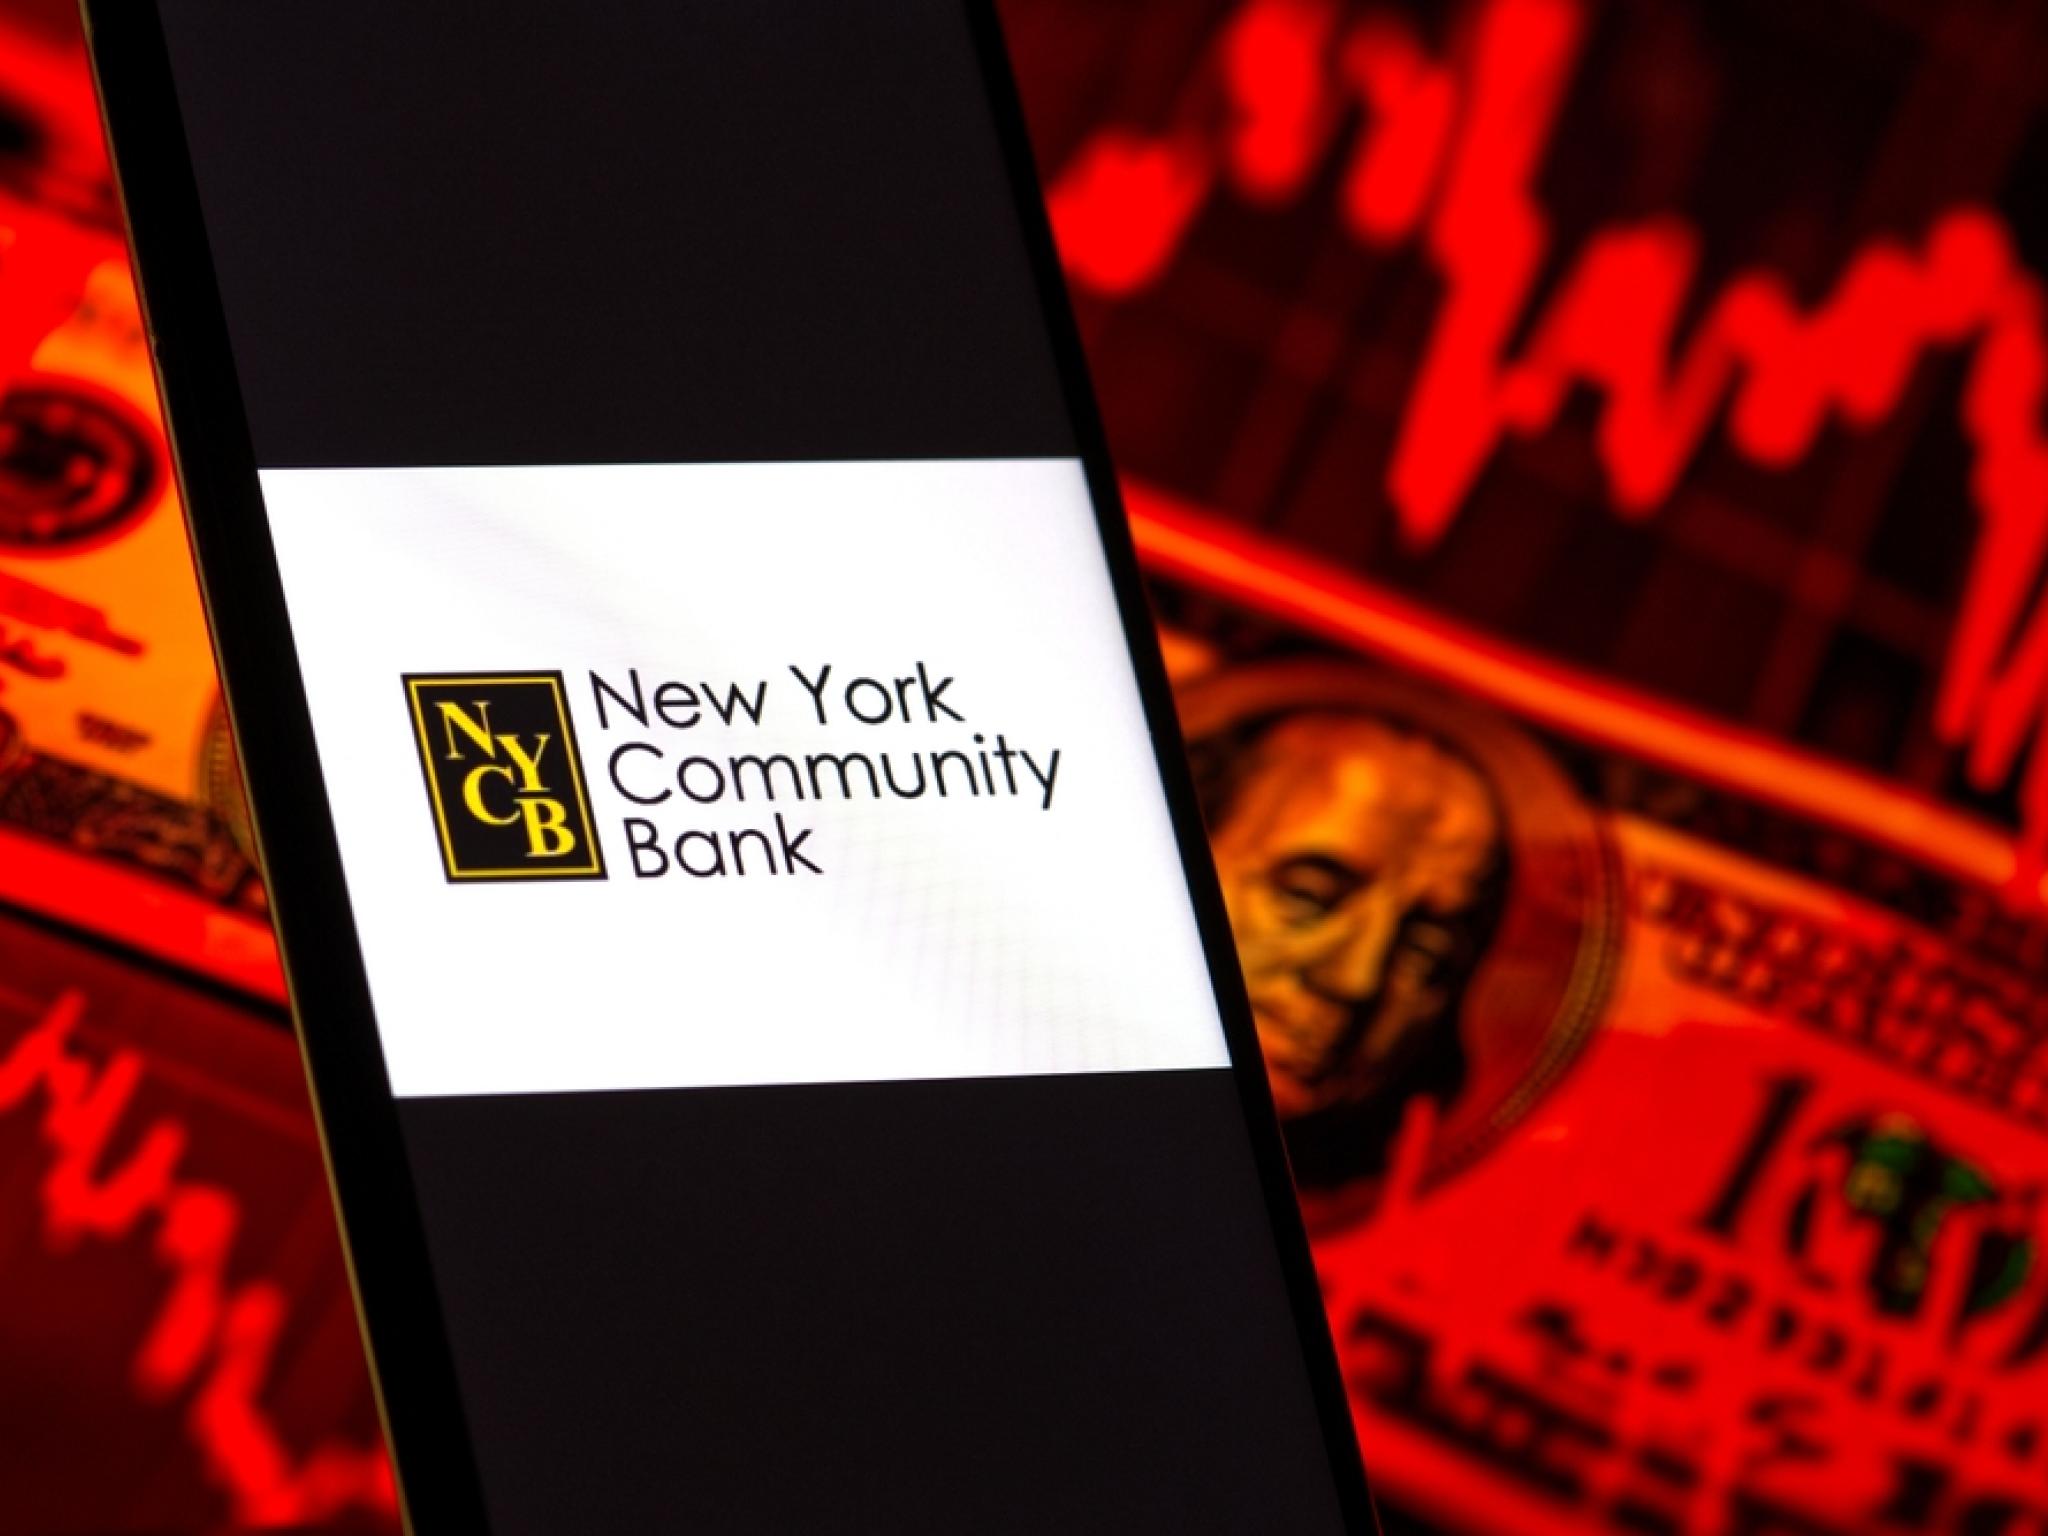  new-york-community-bancorps-credit-story-remains-fluid-analysts-react-to-q2-results 